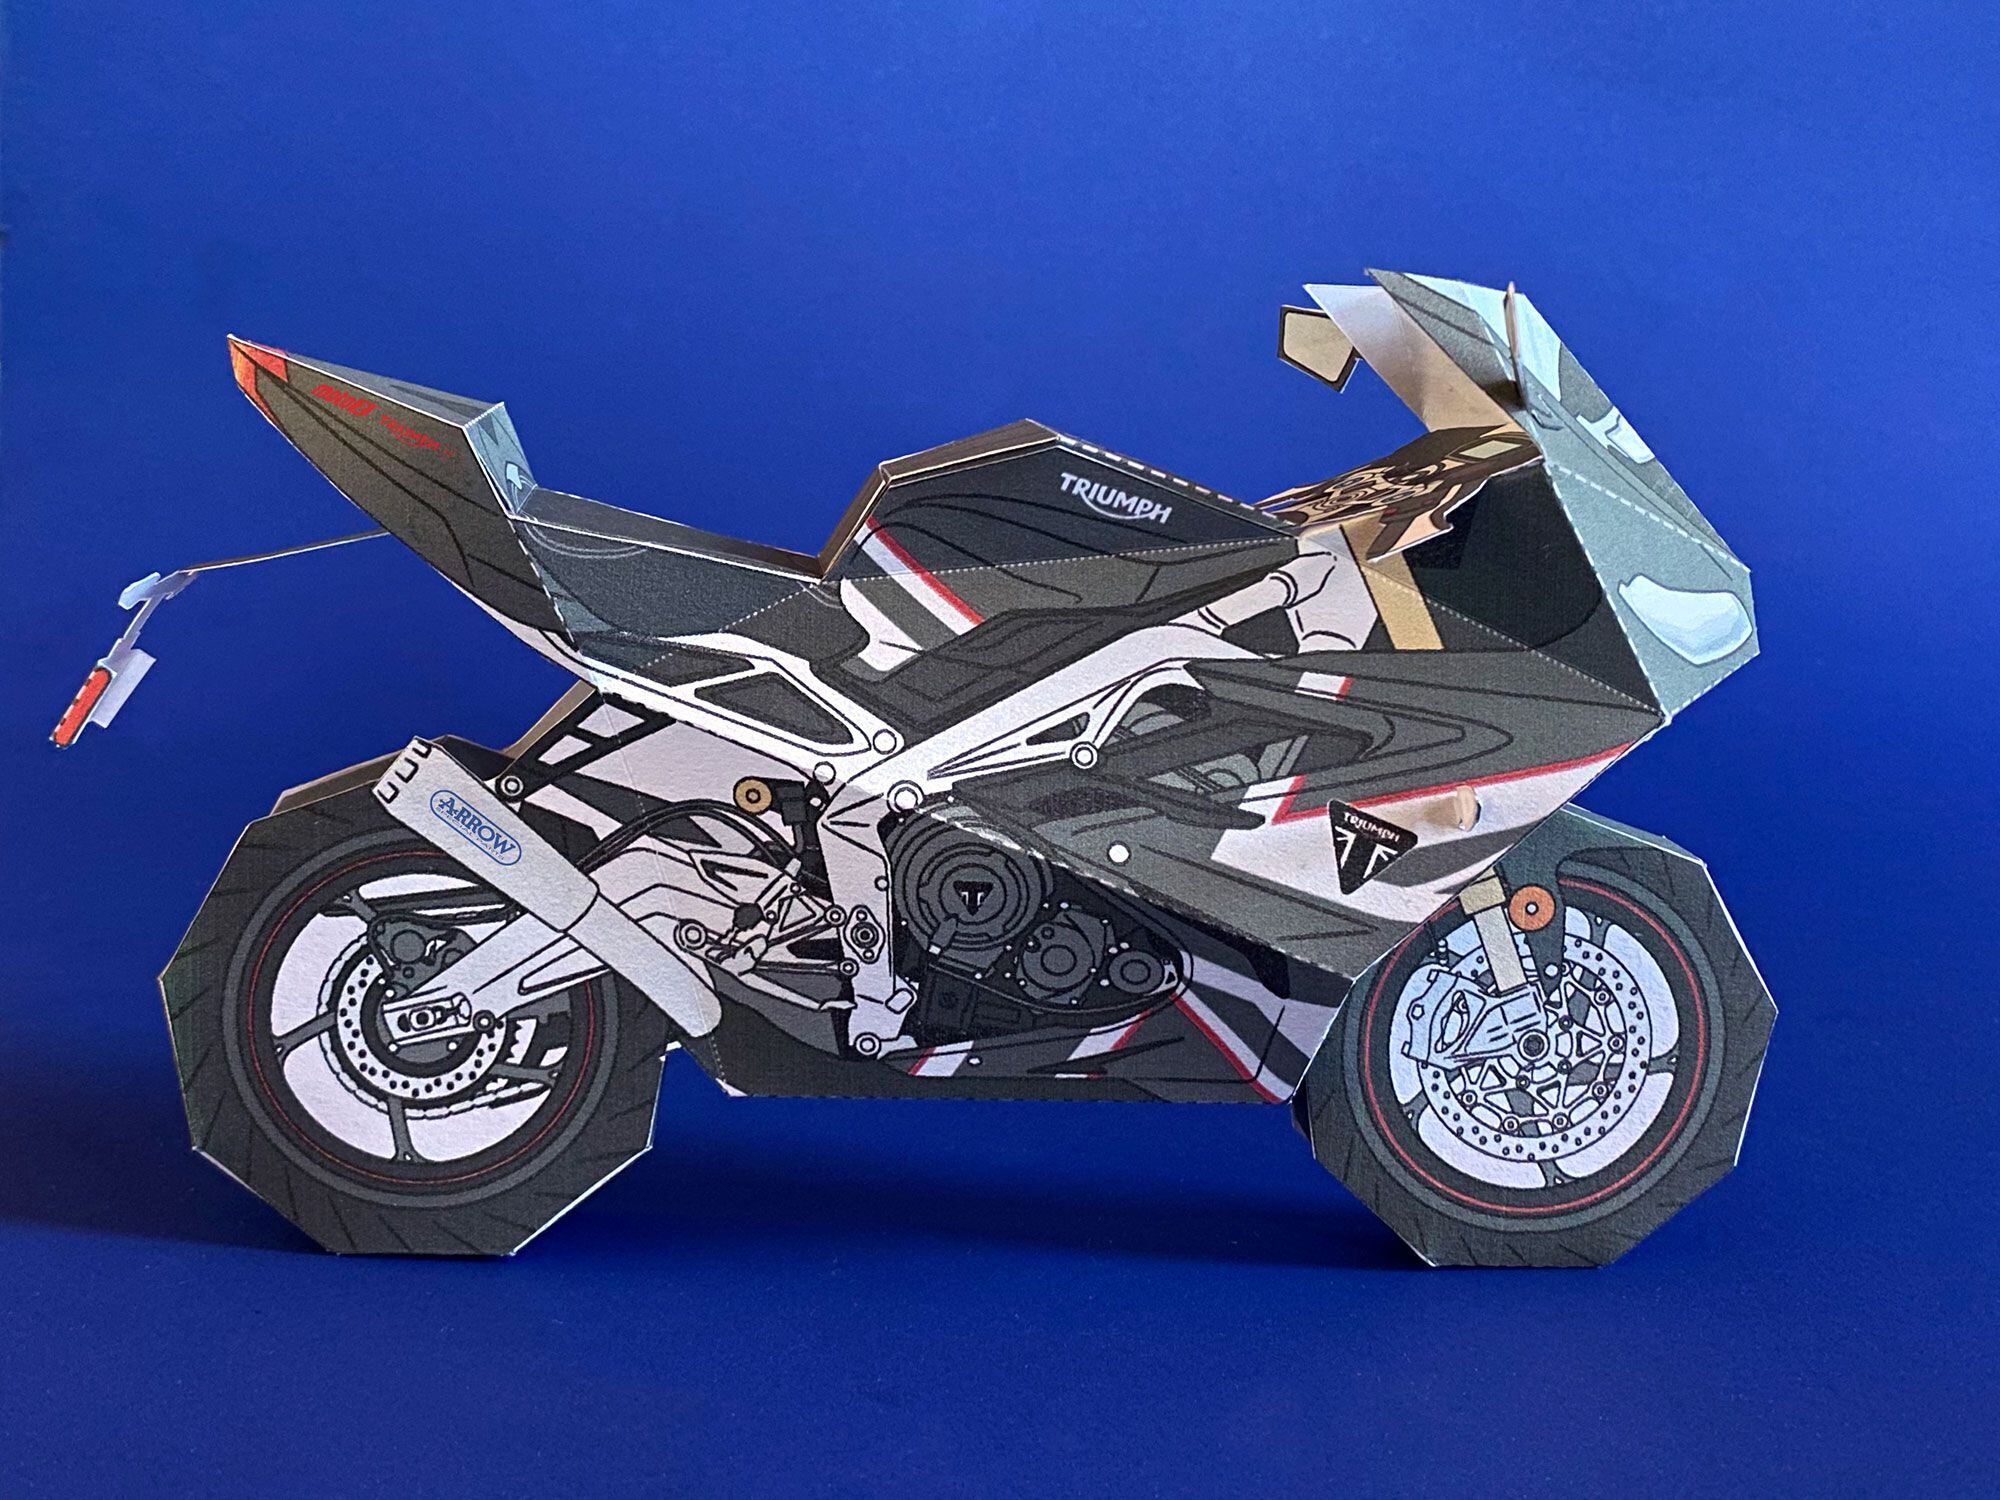 Hottest Triumph sportbike ever? The limited-edition Daytona Moto2 765 certainly is in the running. Now you can fold your own with our printable template.